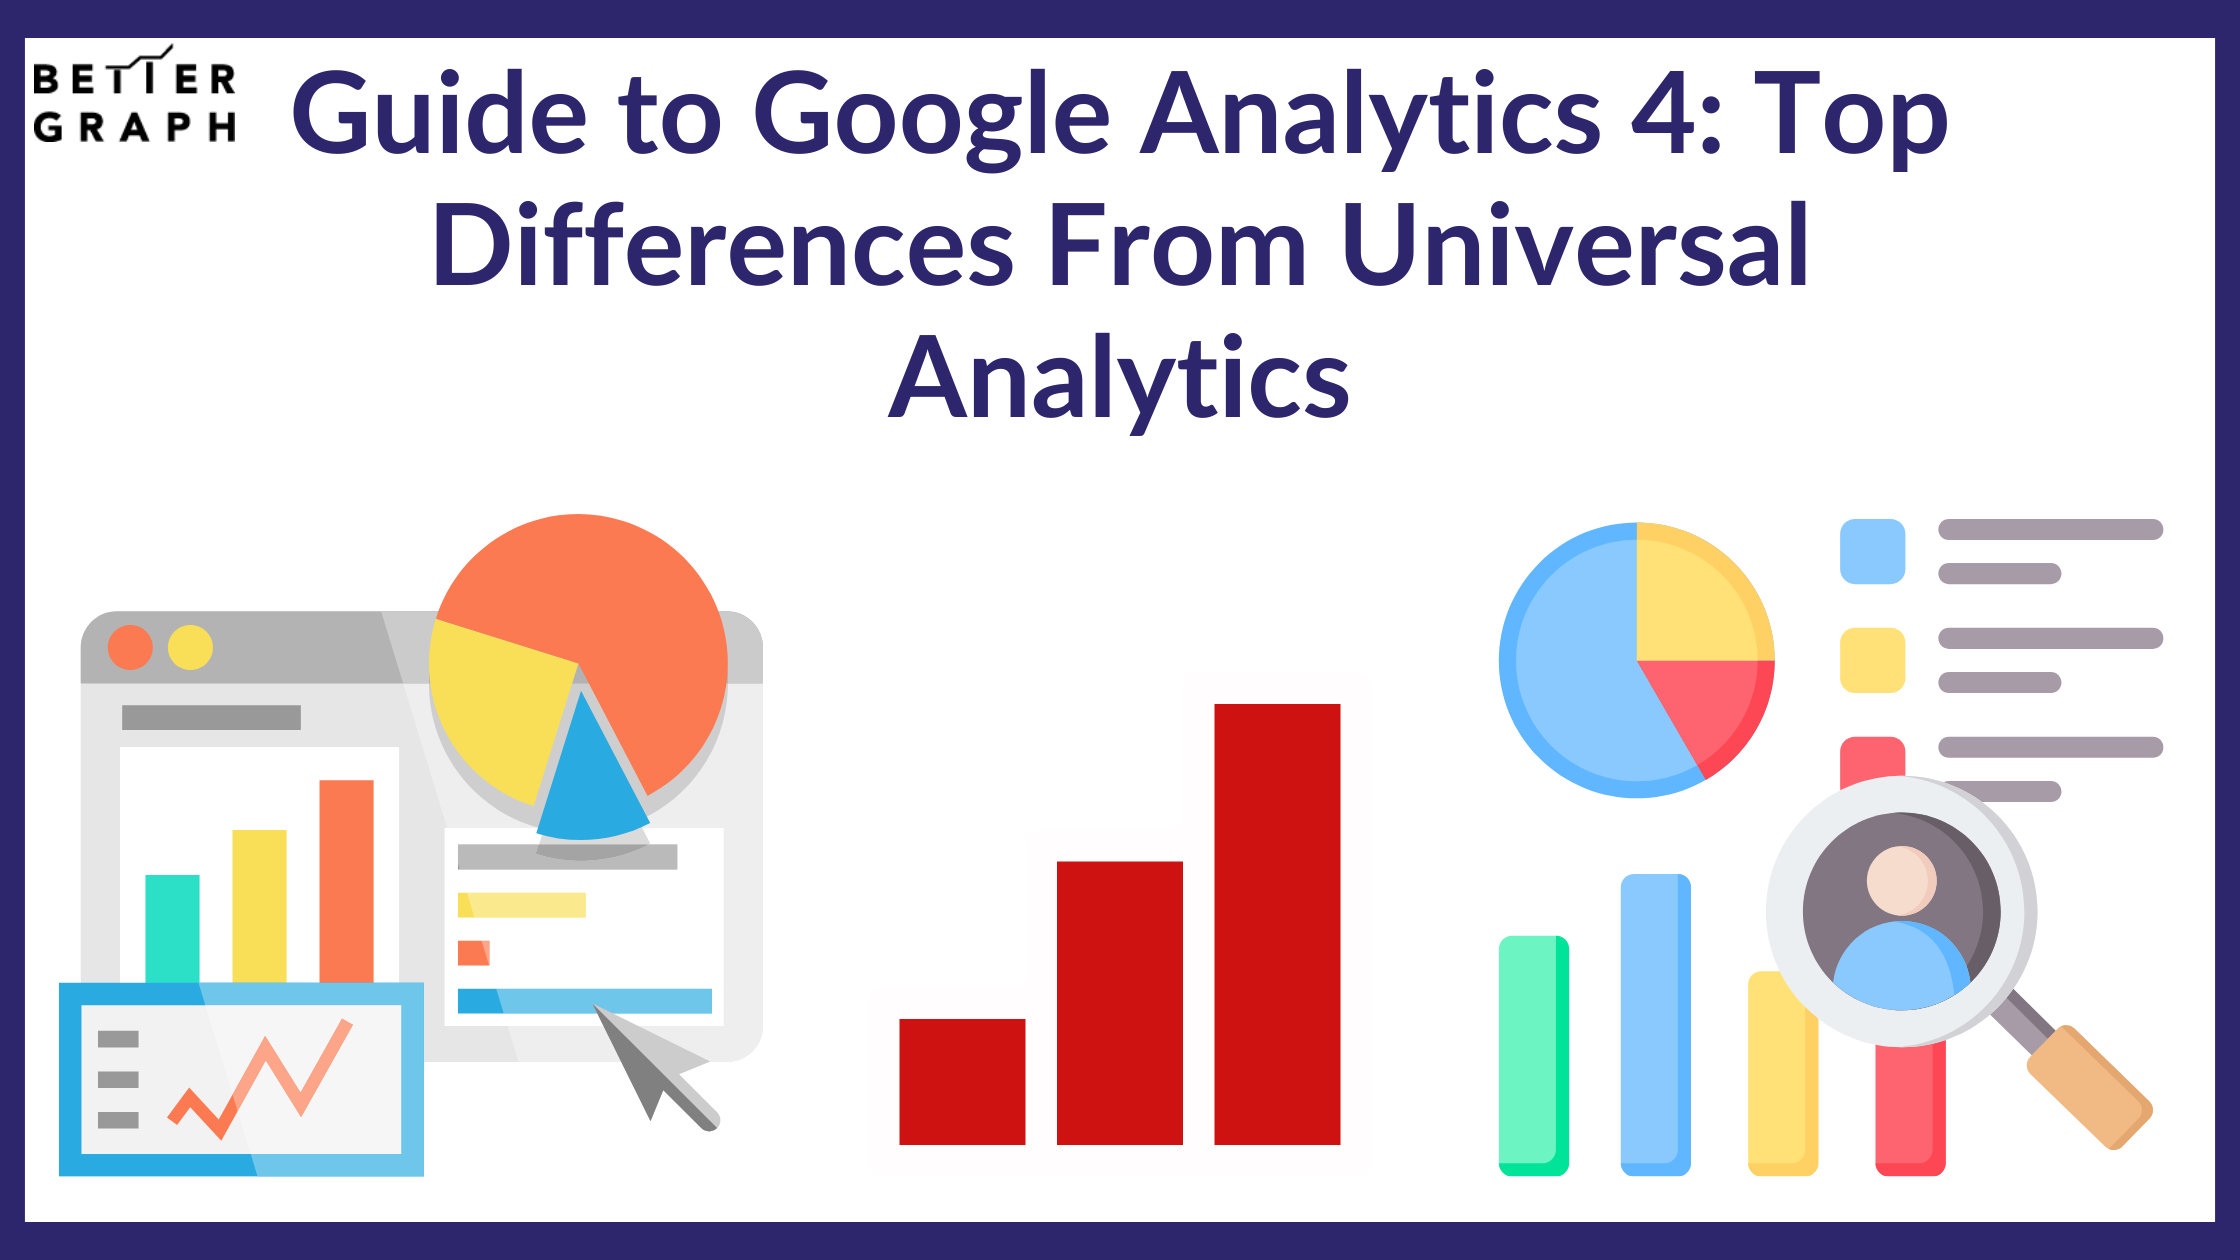 Guide to Google Analytics 4 Top Differences From Universal Analytics (1).png  by BetterGraph